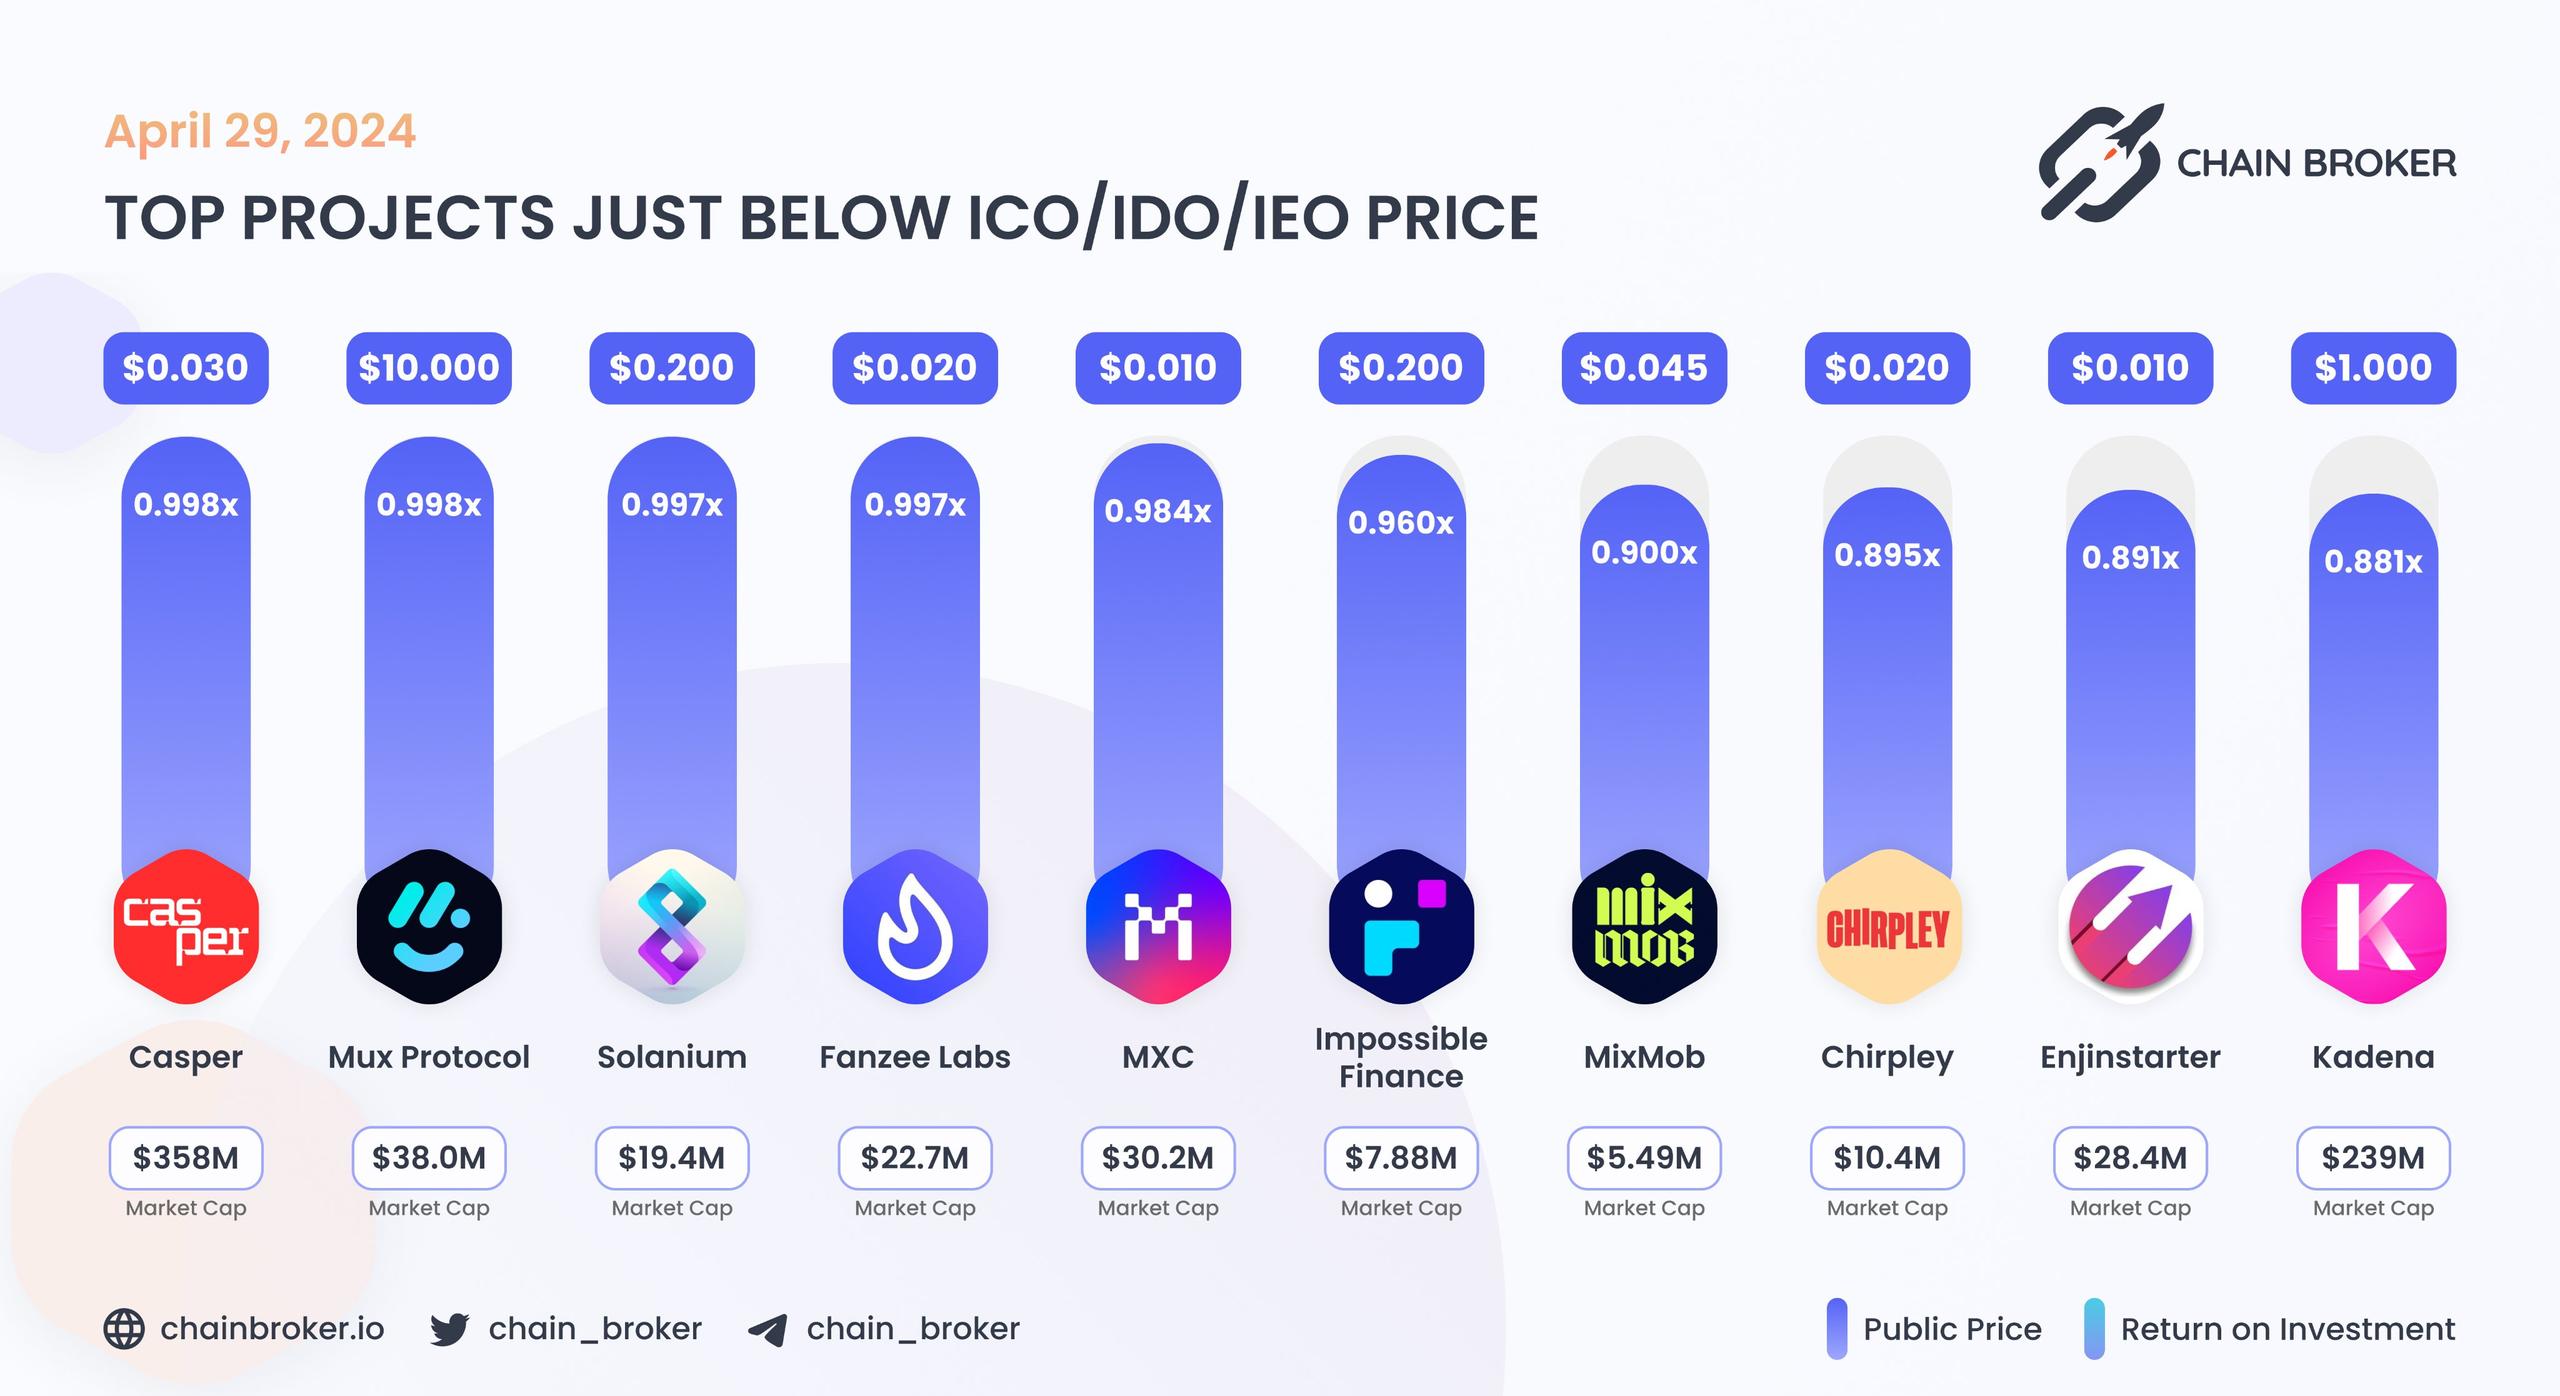 Top projects just below Public Price